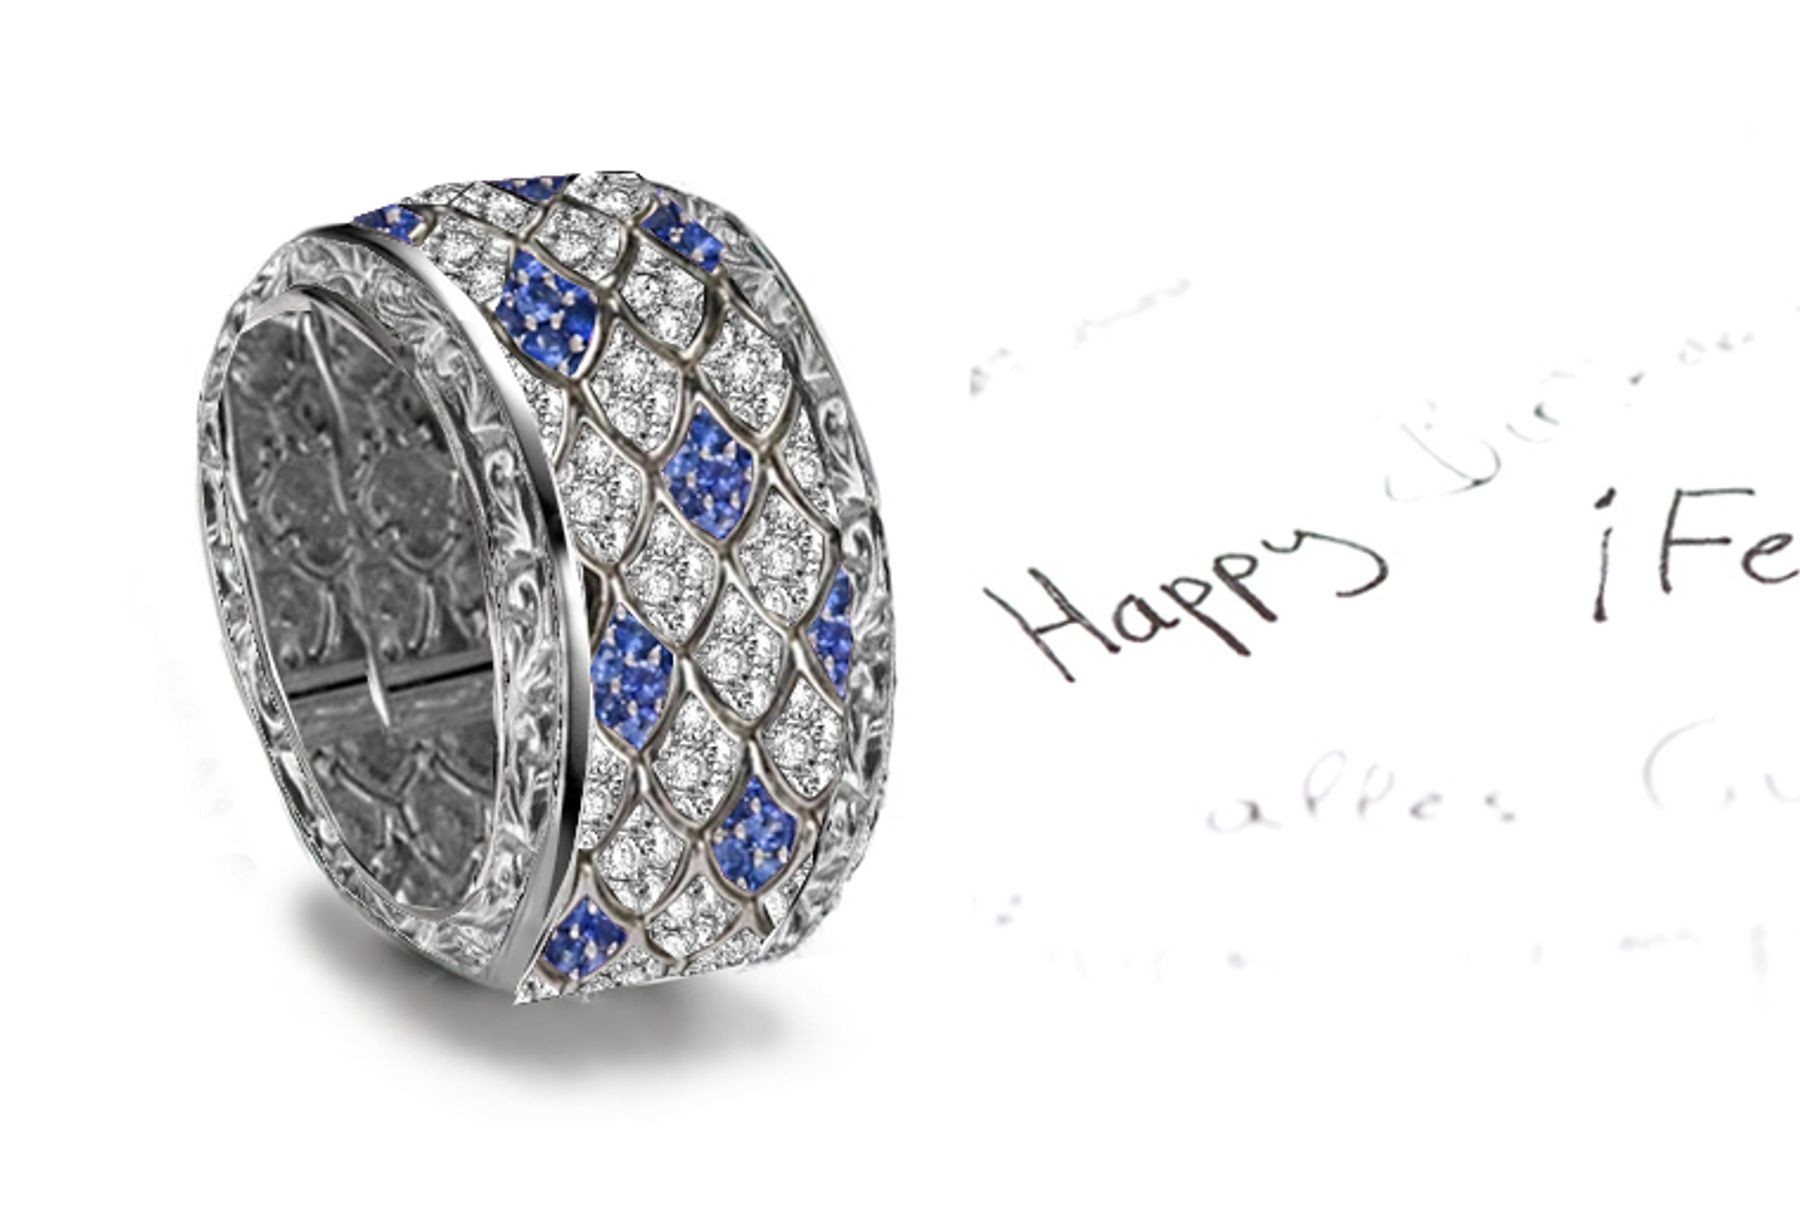 A seamless circle of bright-white and sparkling sapphires & diamonds, totaling 3.50 carats